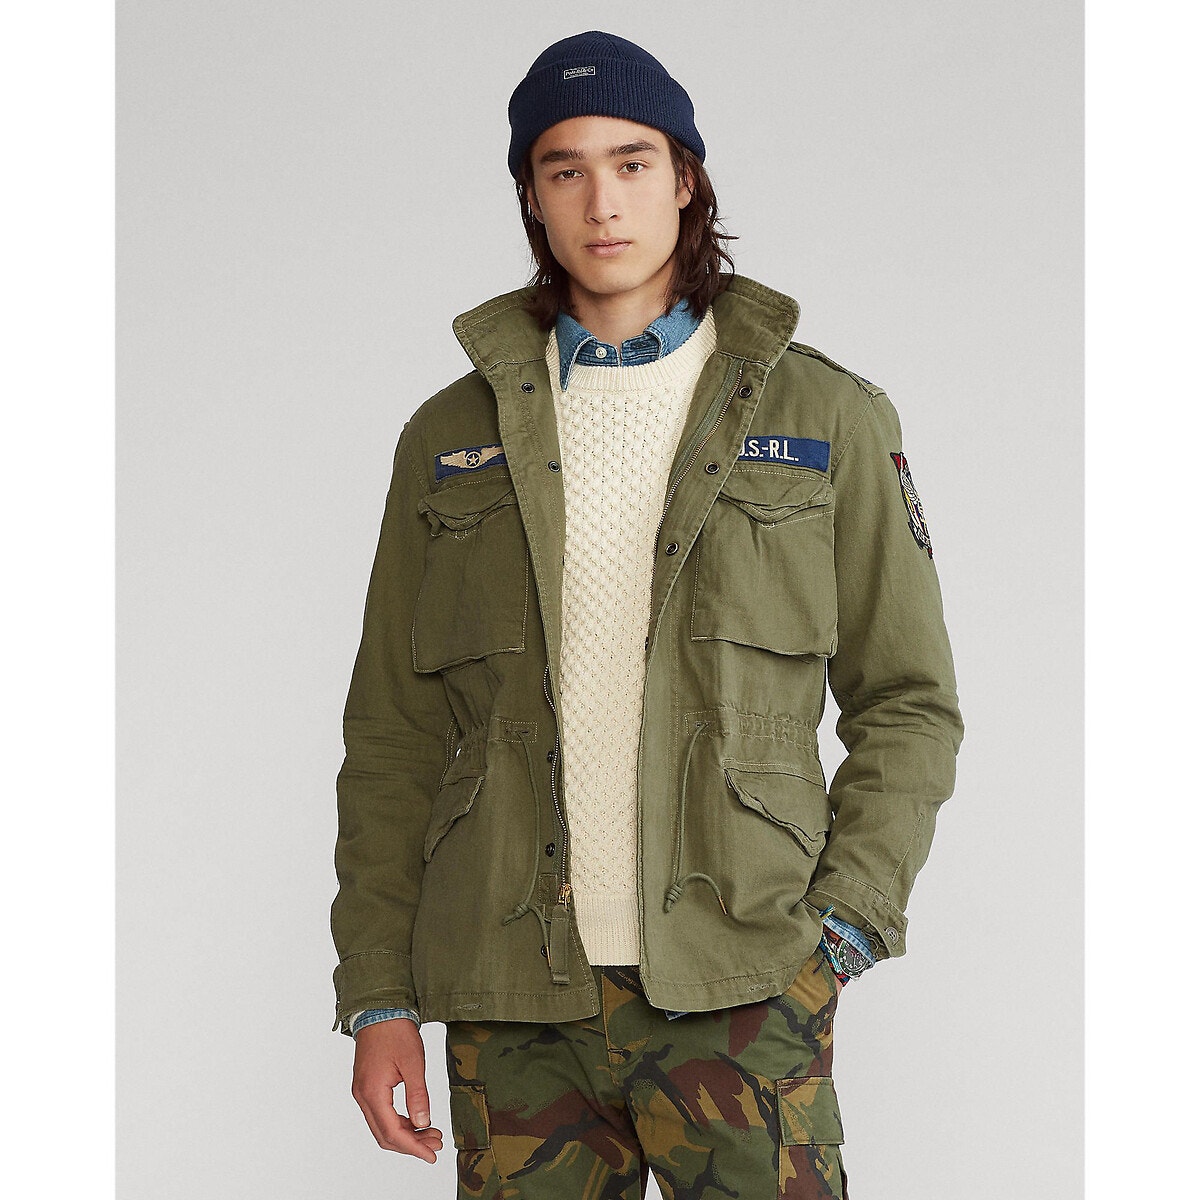 parka homme multi poches